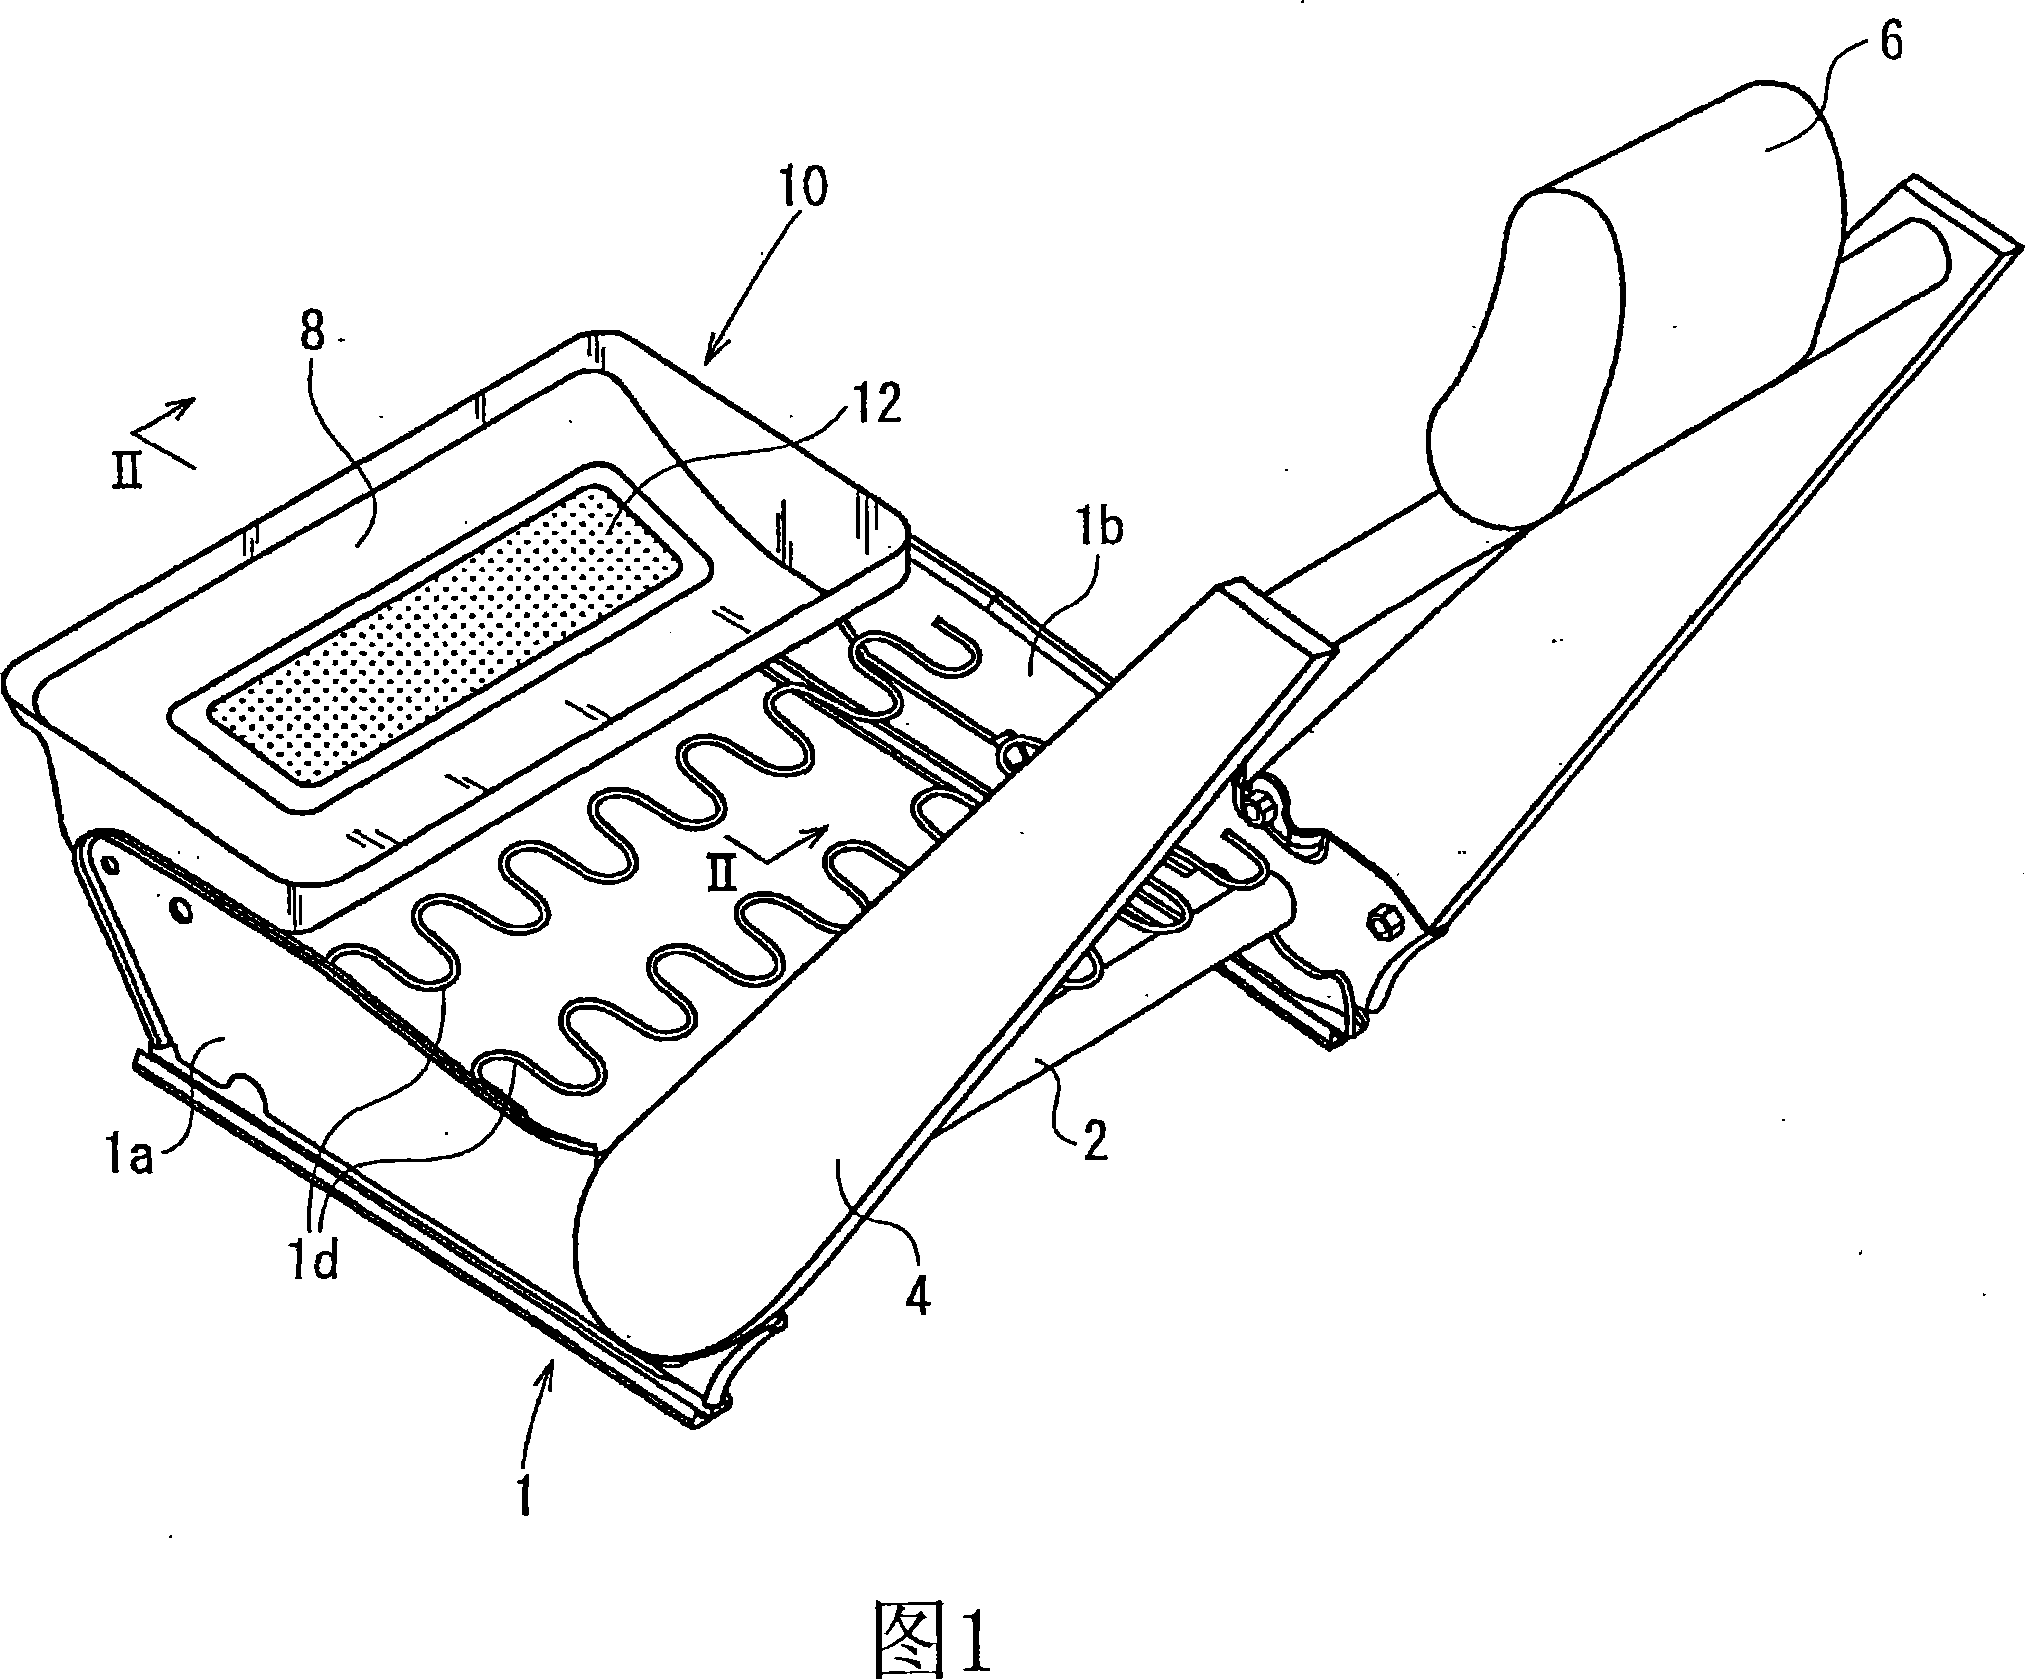 Occupant restraint device and seat